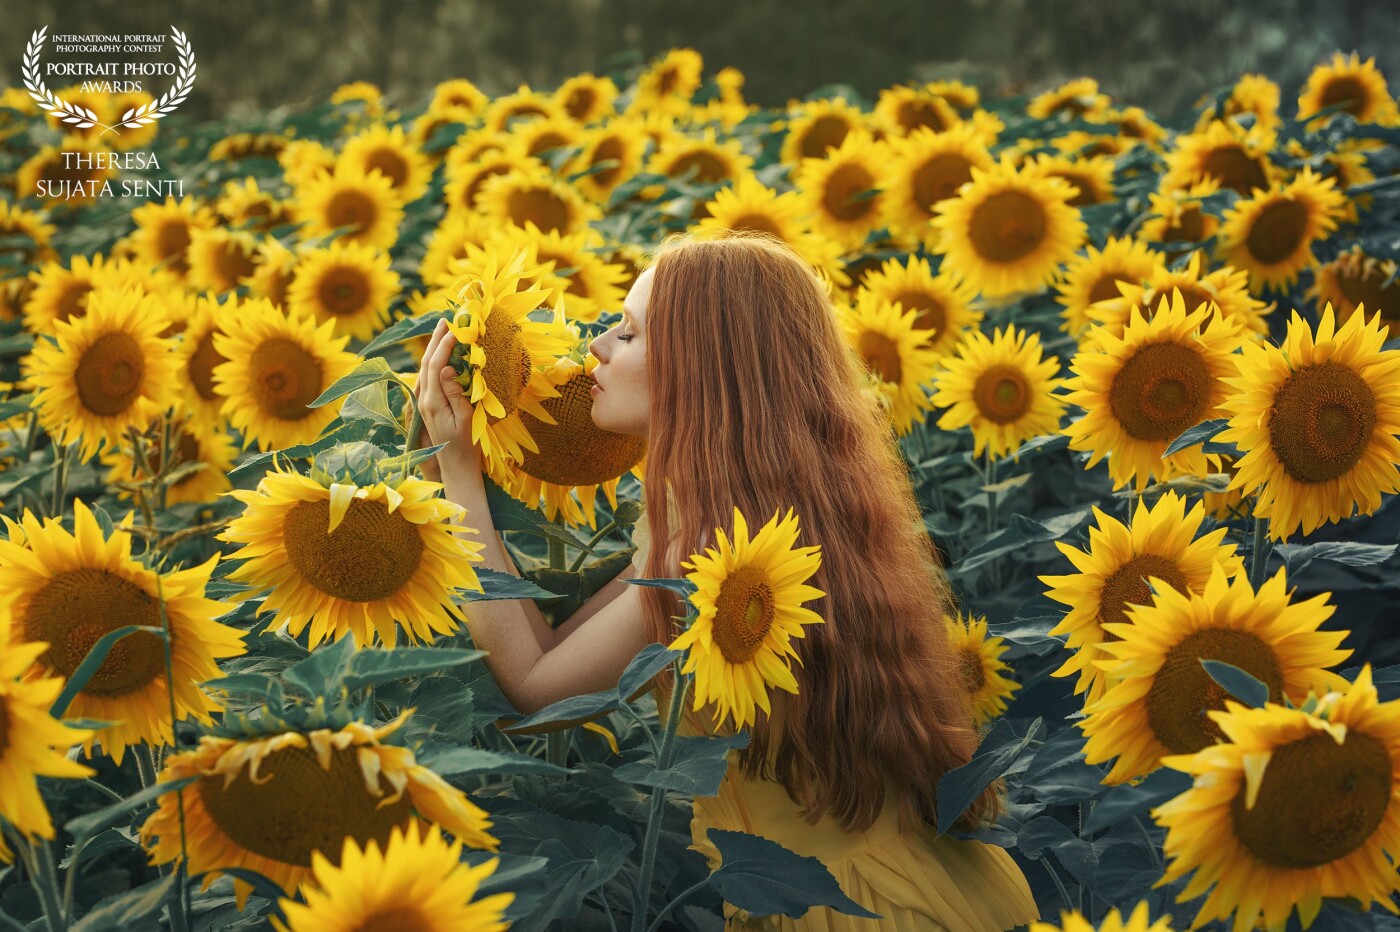 When my boyfriend causally mentioned that he saw a huge sunflower field that I might like, I headed off the next day to see it. It was love at first sight and I did not one but two photoshoots there, beautiful @manuela_mannequin joining me for one of them.